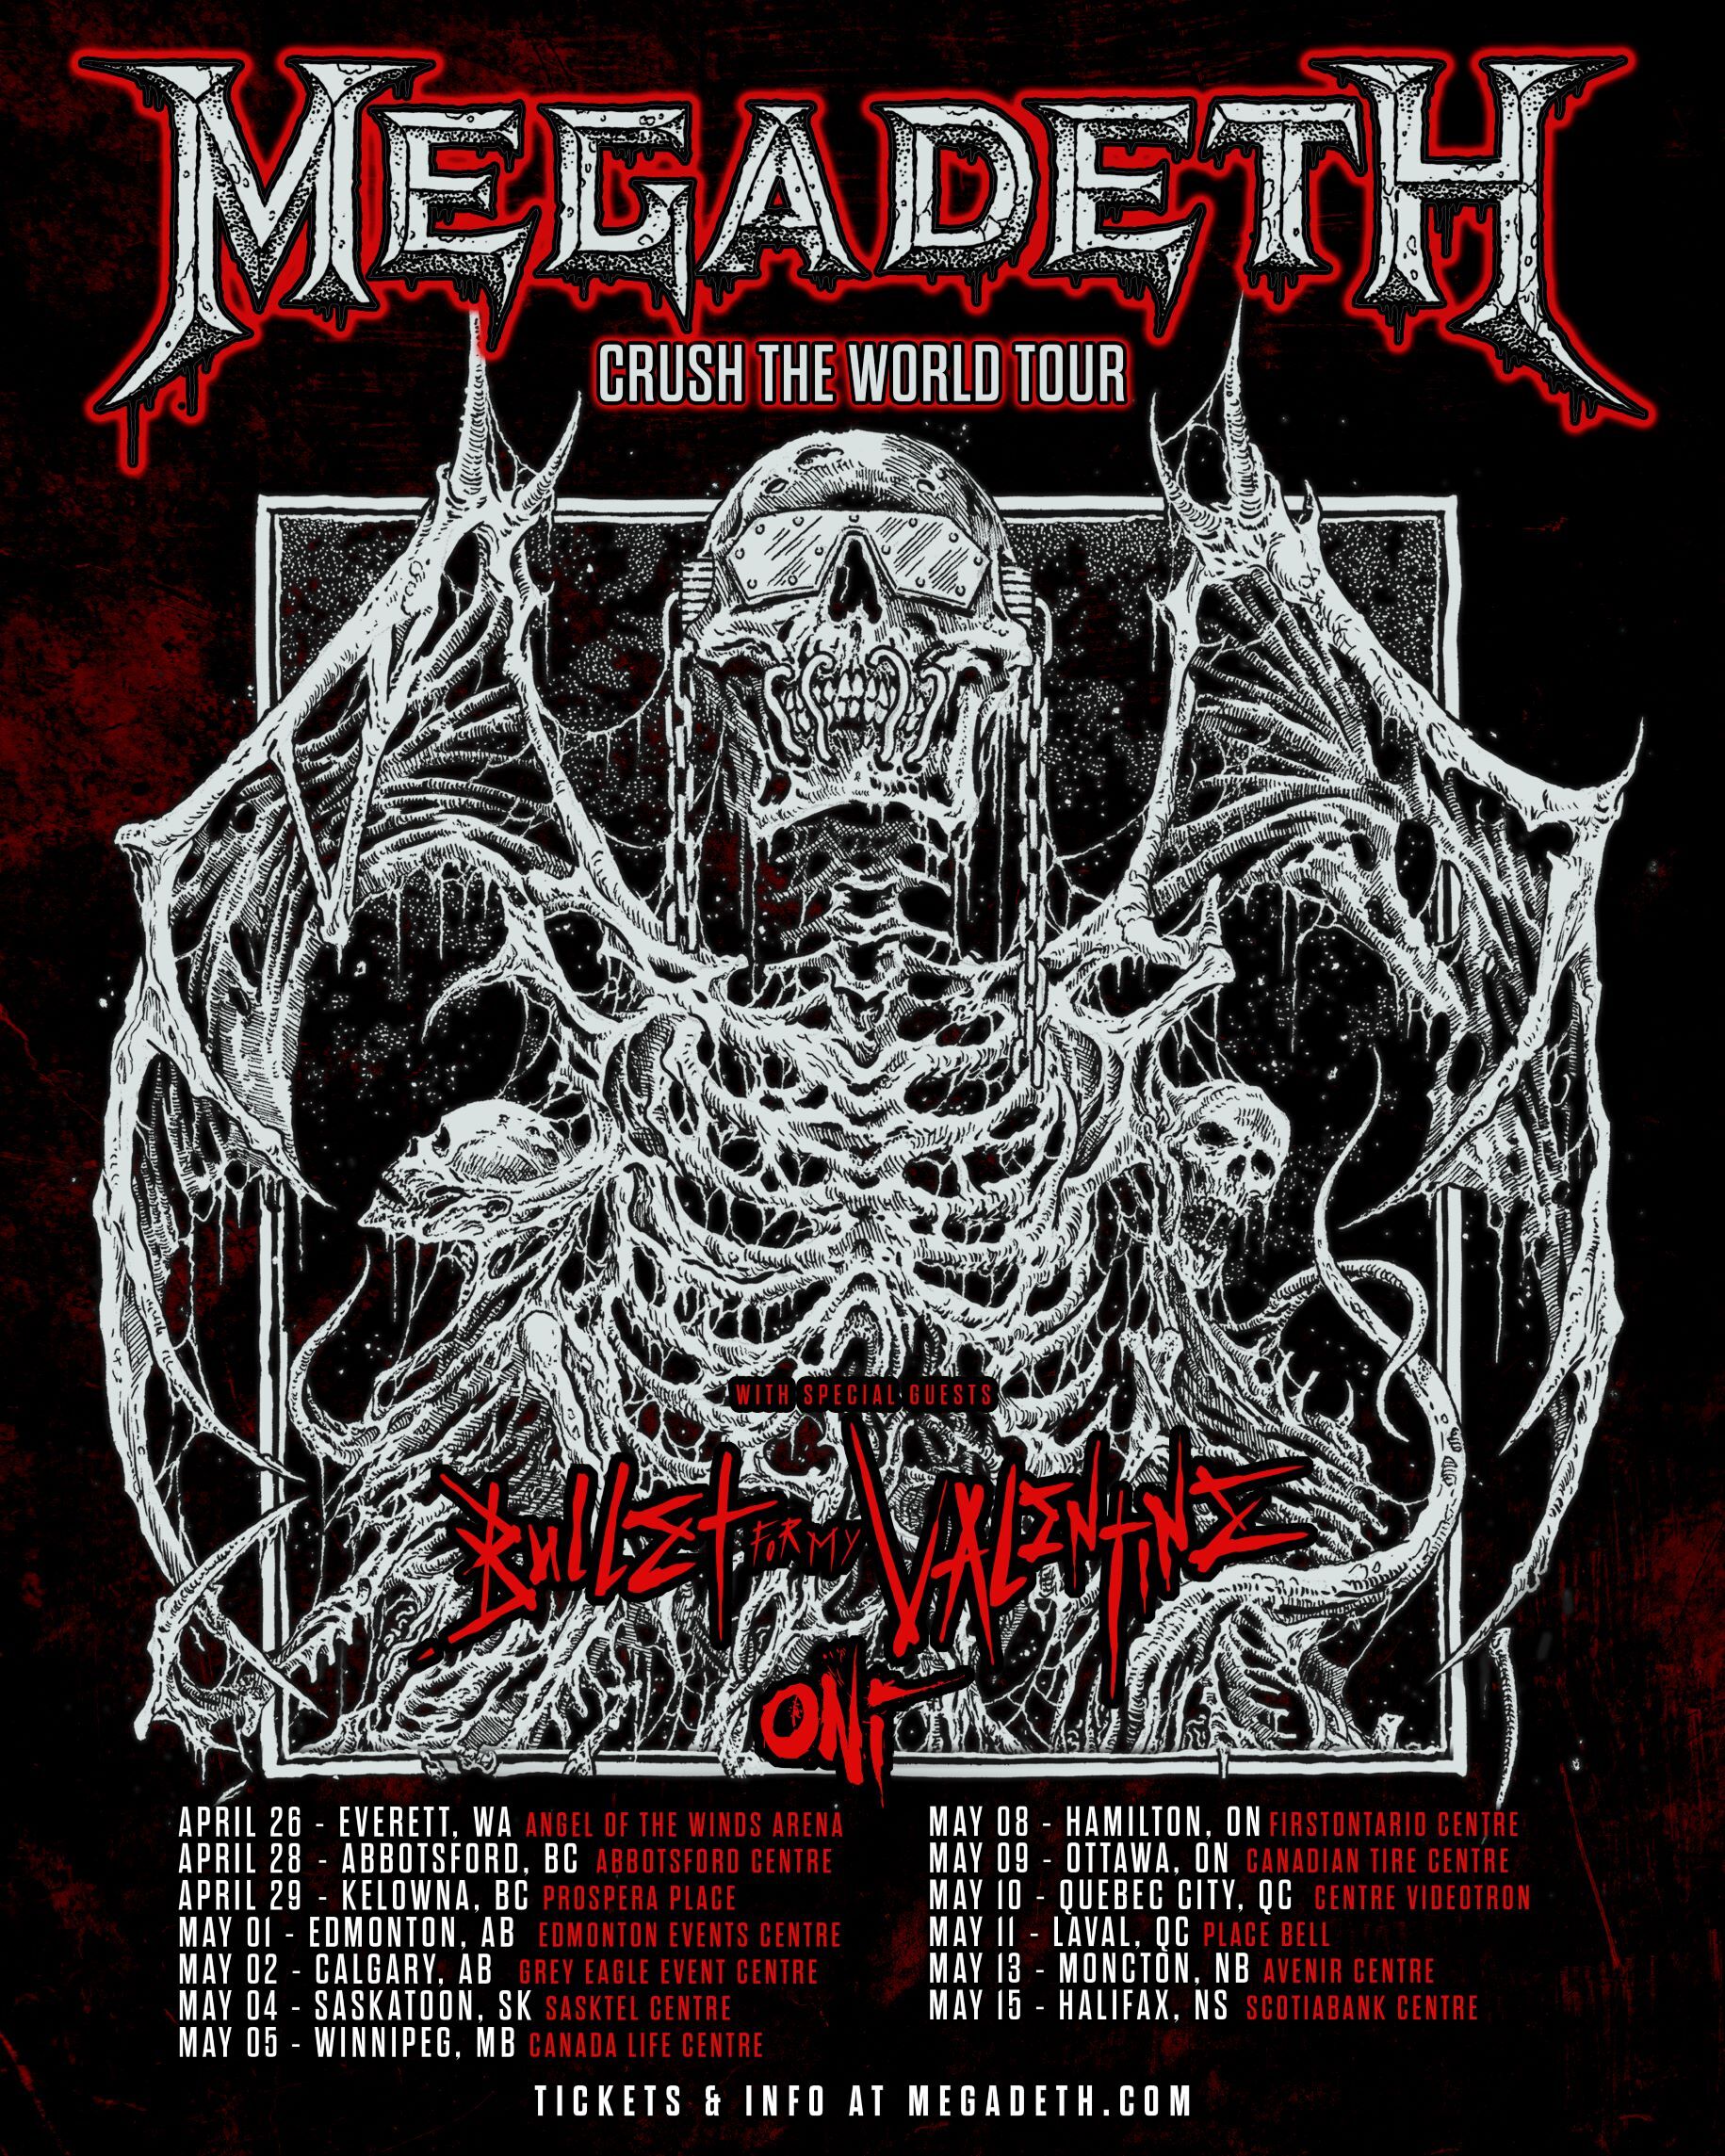 Megadeth “Crush the World” Canadian tour poster